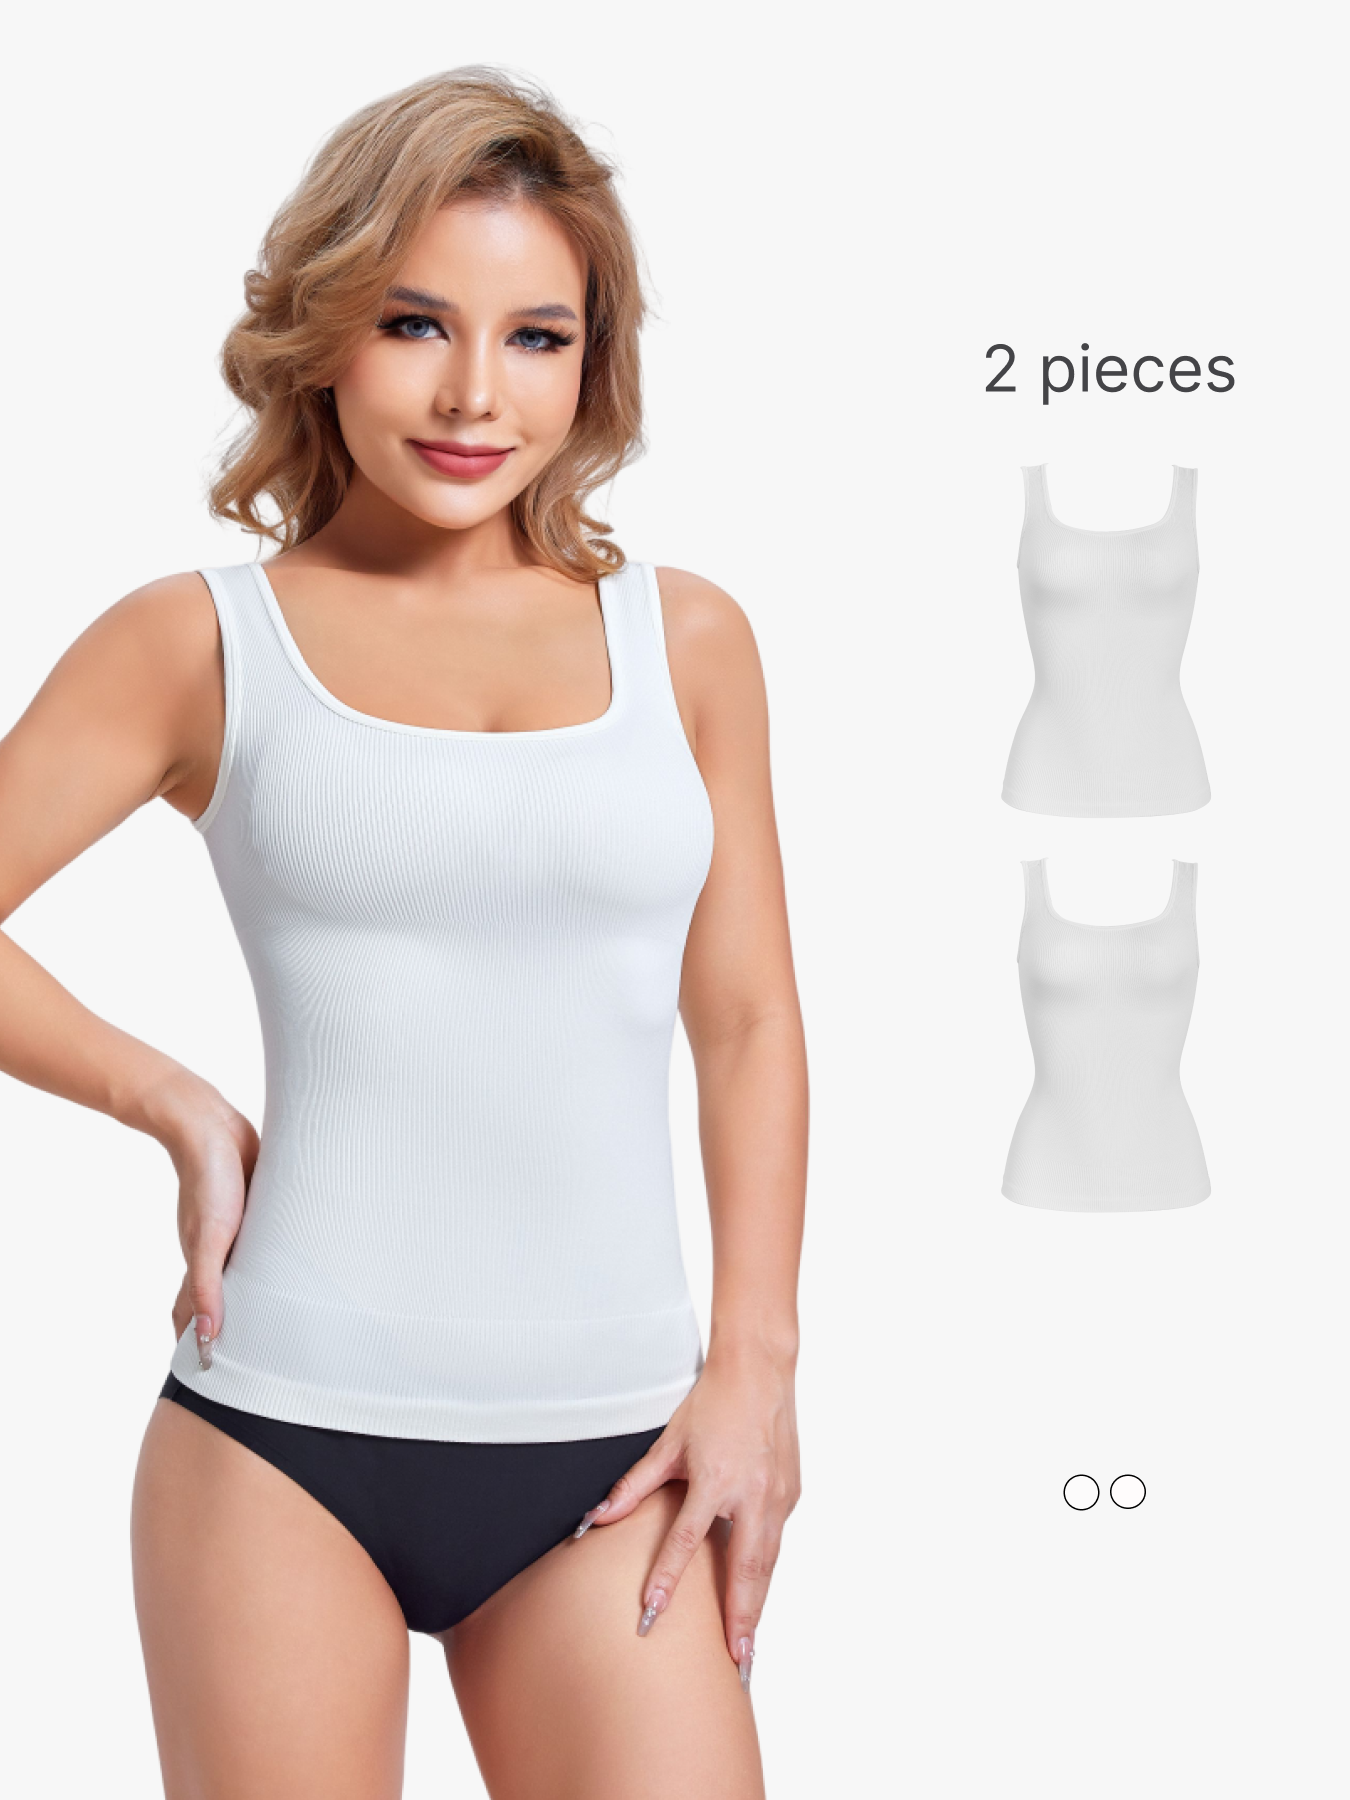 BRABIC 2-Piece Set Compression Tank Tops for Women Tummy Control Shapewear Square Neck Camisole Tanks Shaper TO018